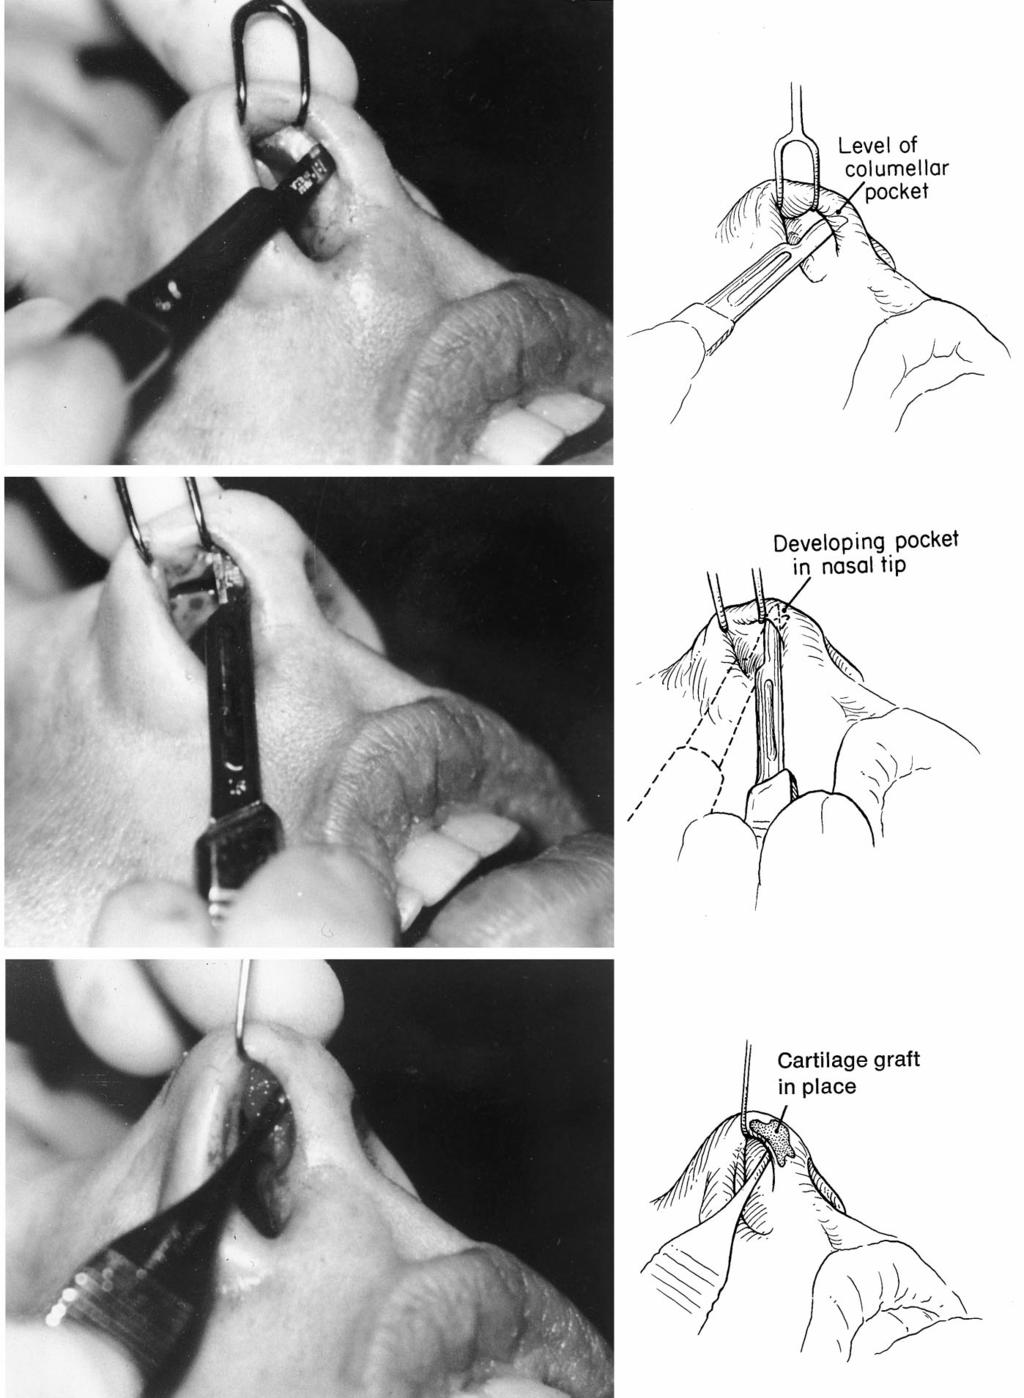 1828 PLASTIC AND RECONSTRUCTIVE SURGERY, April 2000 FIG. 10. (Above) Original tip graft technique. Opening incision at the columellarlobular junction.